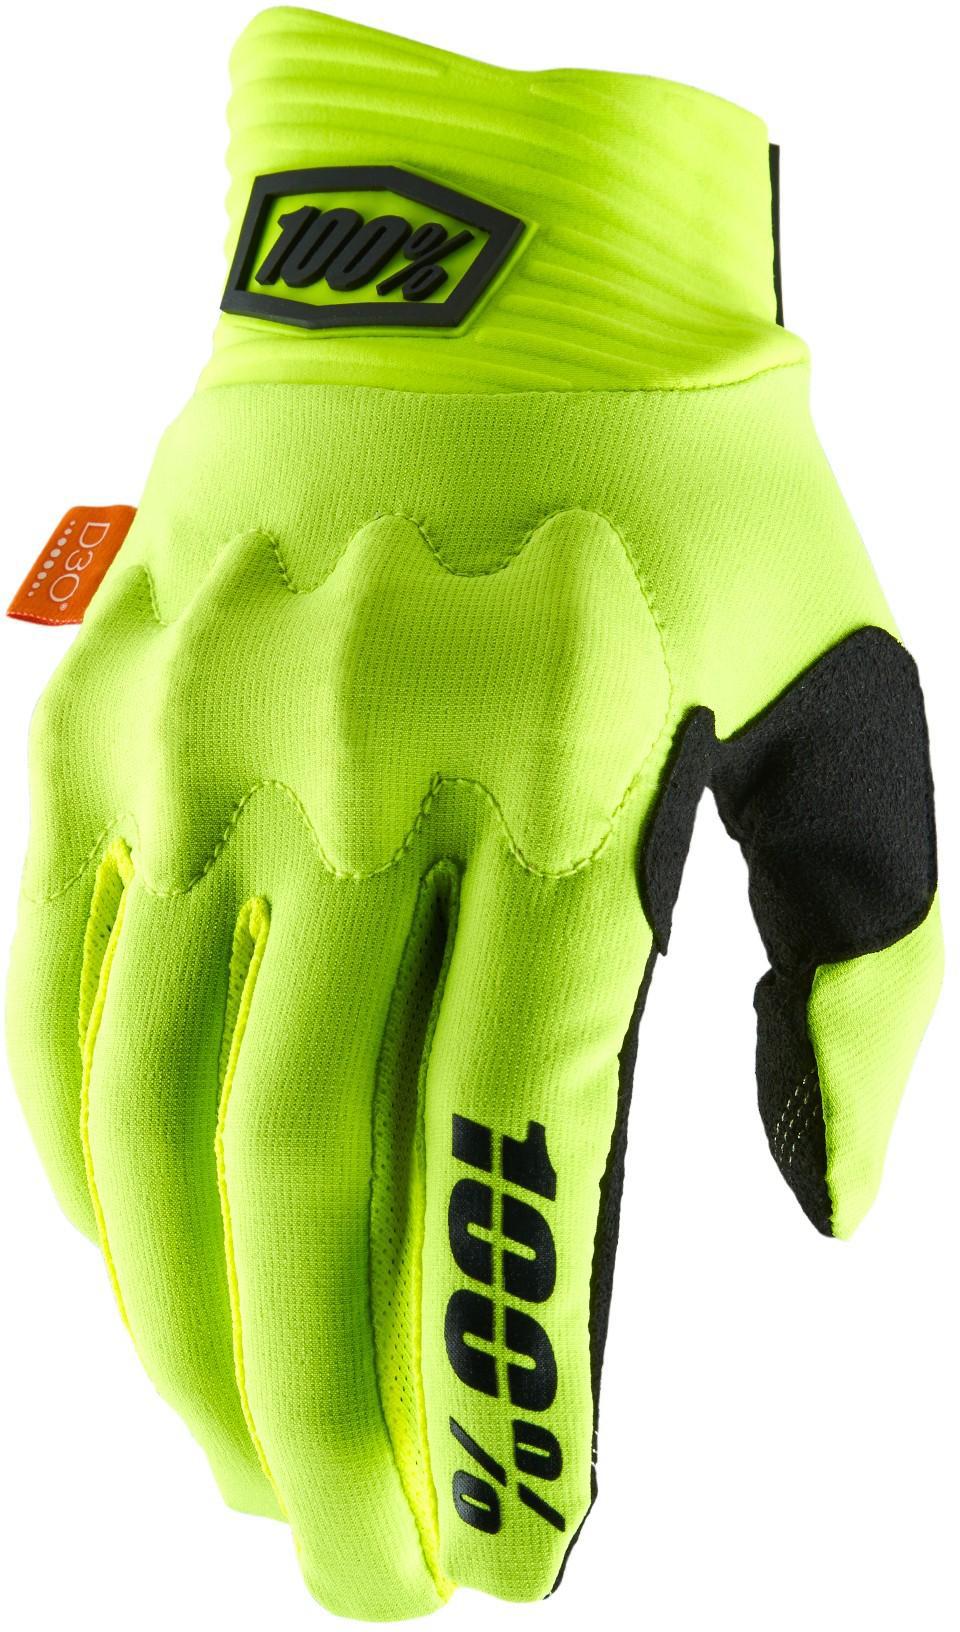 100% Cognito D30 Gloves - Fluo Yellow/black